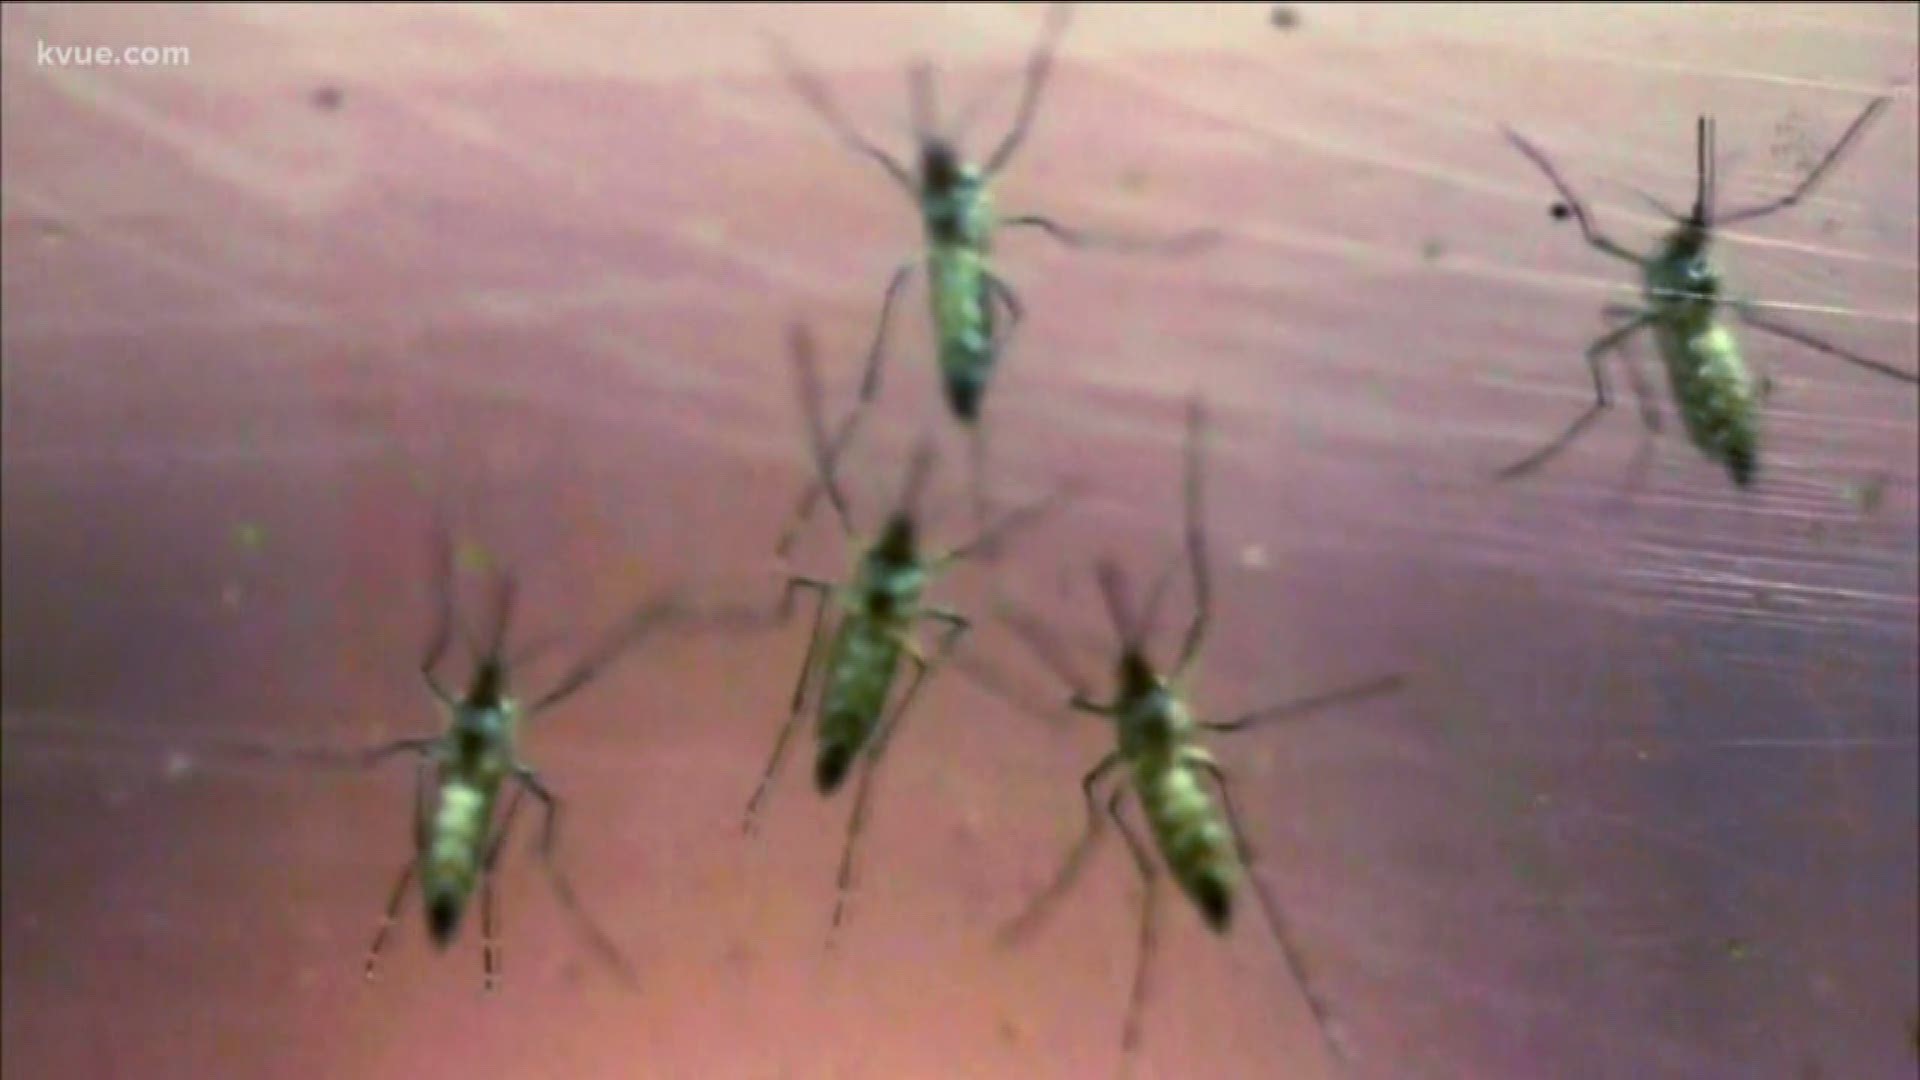 Rising temperatures bring increased activity of pesky mosquitoes. Its not just the itching you need to be worried about. Some of those mosquitoes carry diseases, including The Zika virus, West Nile virus, Chikungunya and malaria. Here with tips on how to keep you safe is Dr. Neha Sharma with Sound Physicians.